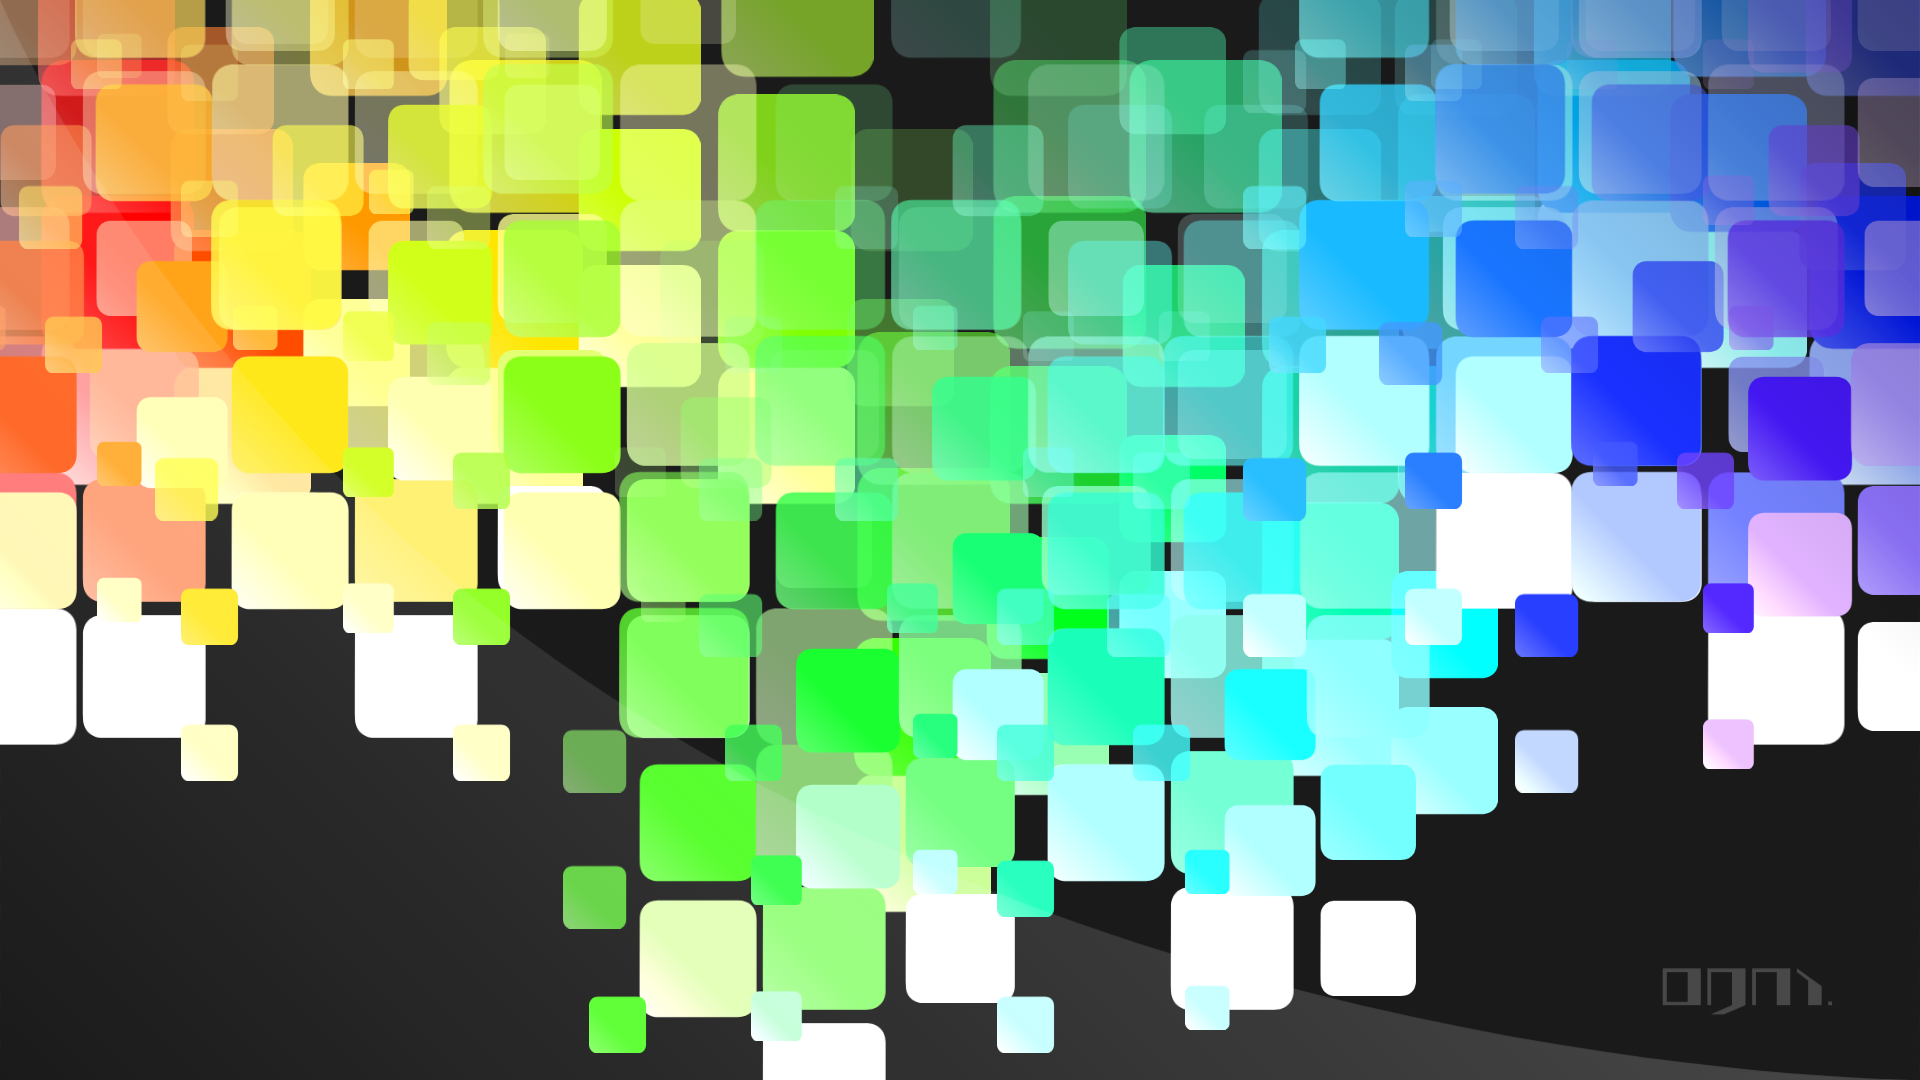 Abstract Square Bubbles Colorful Bright Minimalism Vector 1920x1080